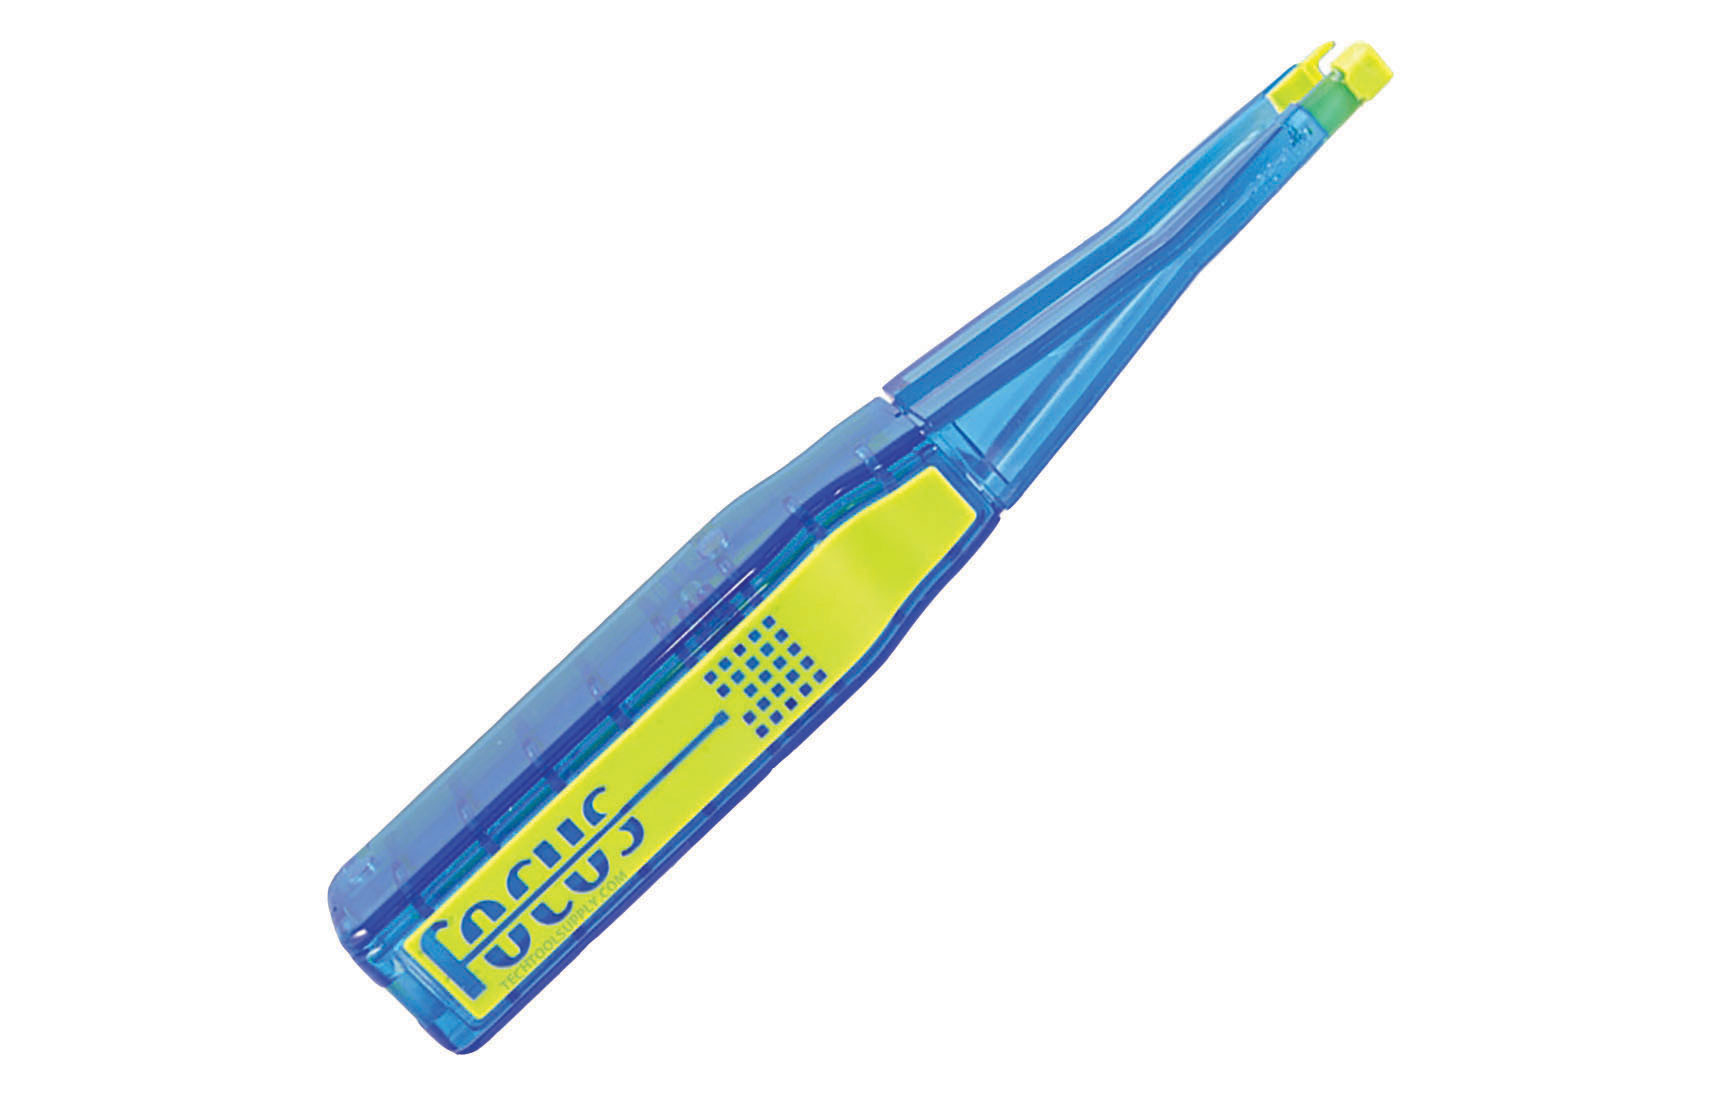 Blue and green removal tool. Image by Fiber Instrument Sales.